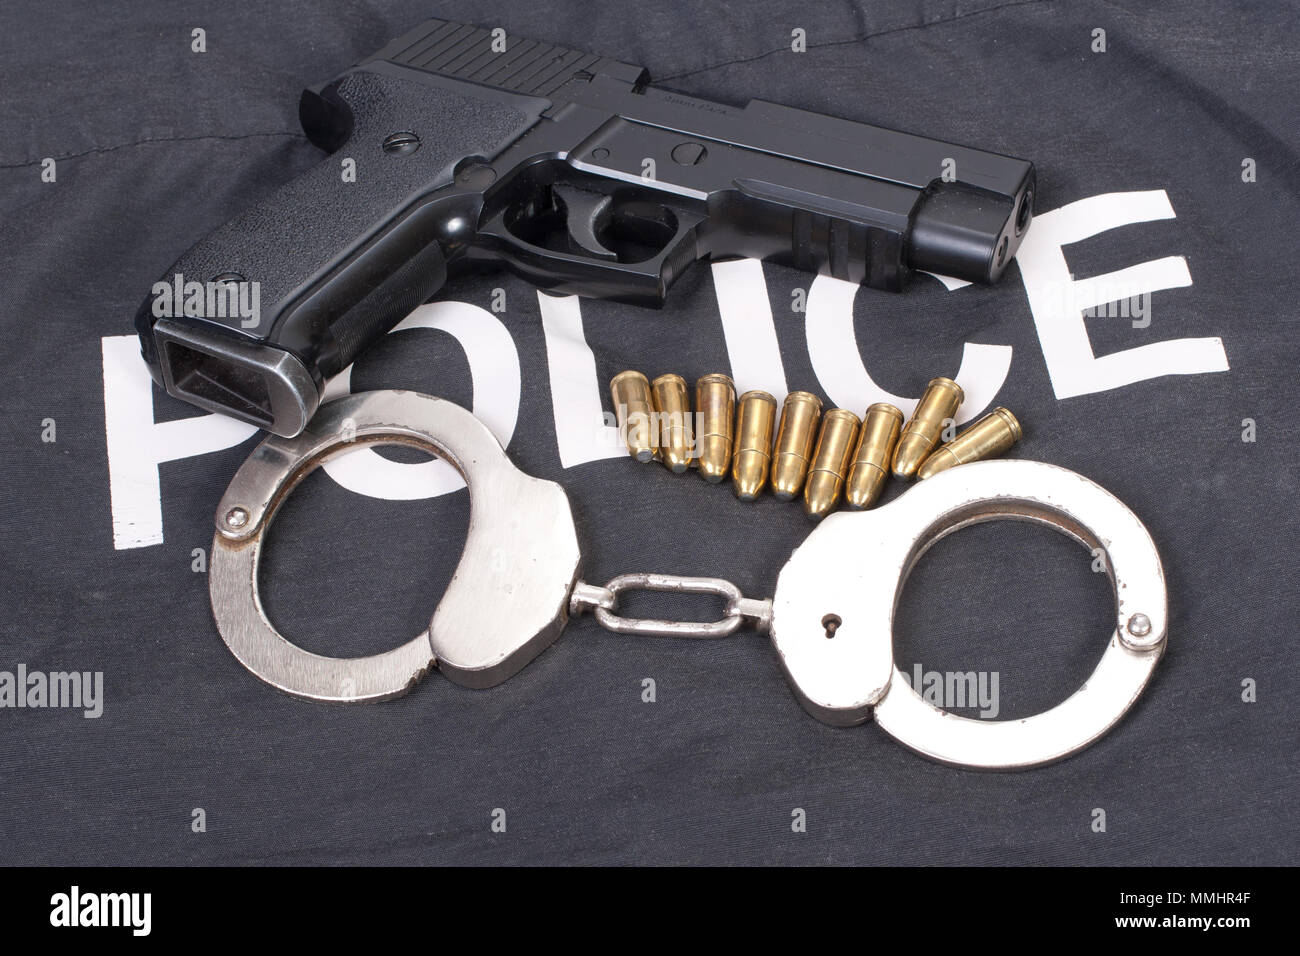 police concept with gun ammo and handcuffs Stock Photo - Alamy